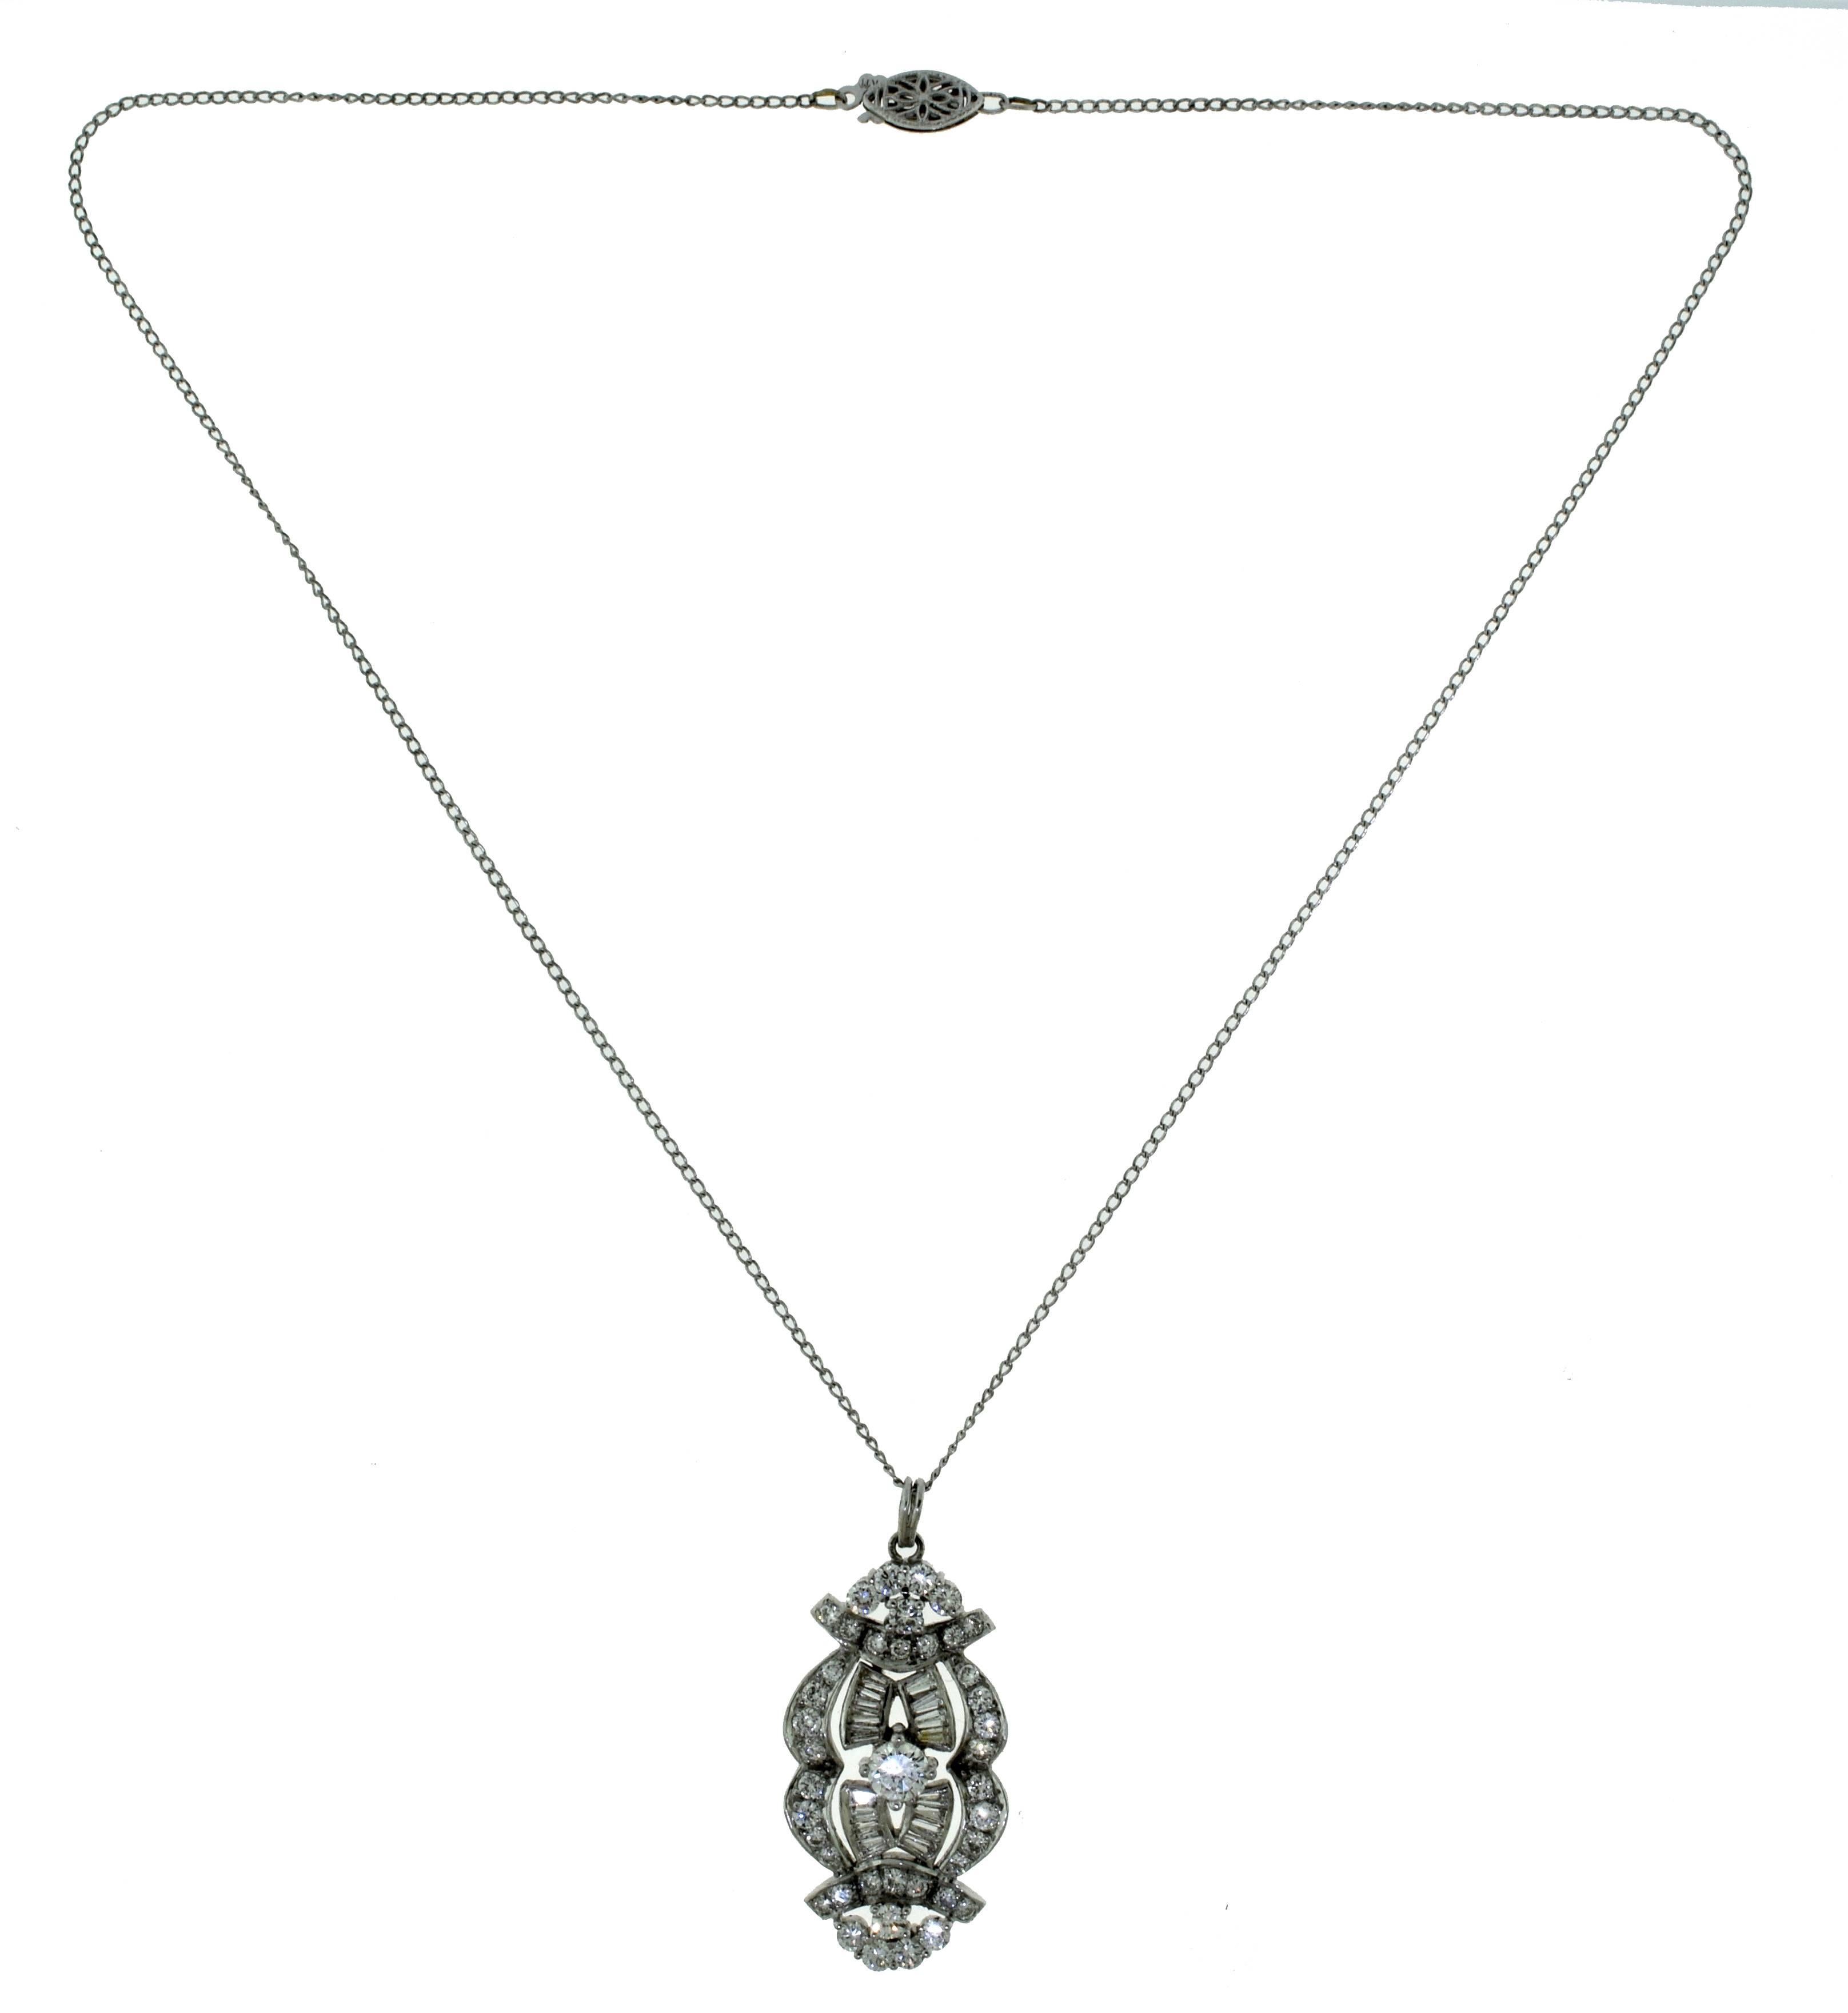 Type: Pendant Necklace
Style: Art Deco
Pendant Metal: Platinum
Chain Metal: 14k White Gold
Chain Length: 16 inches
Stones: Baguette and Round Diamonds
Total Carat Weight: 2.5 carat
Diamond Color: G - H
Diamond Clarity: VS
Total Item Weight (g):